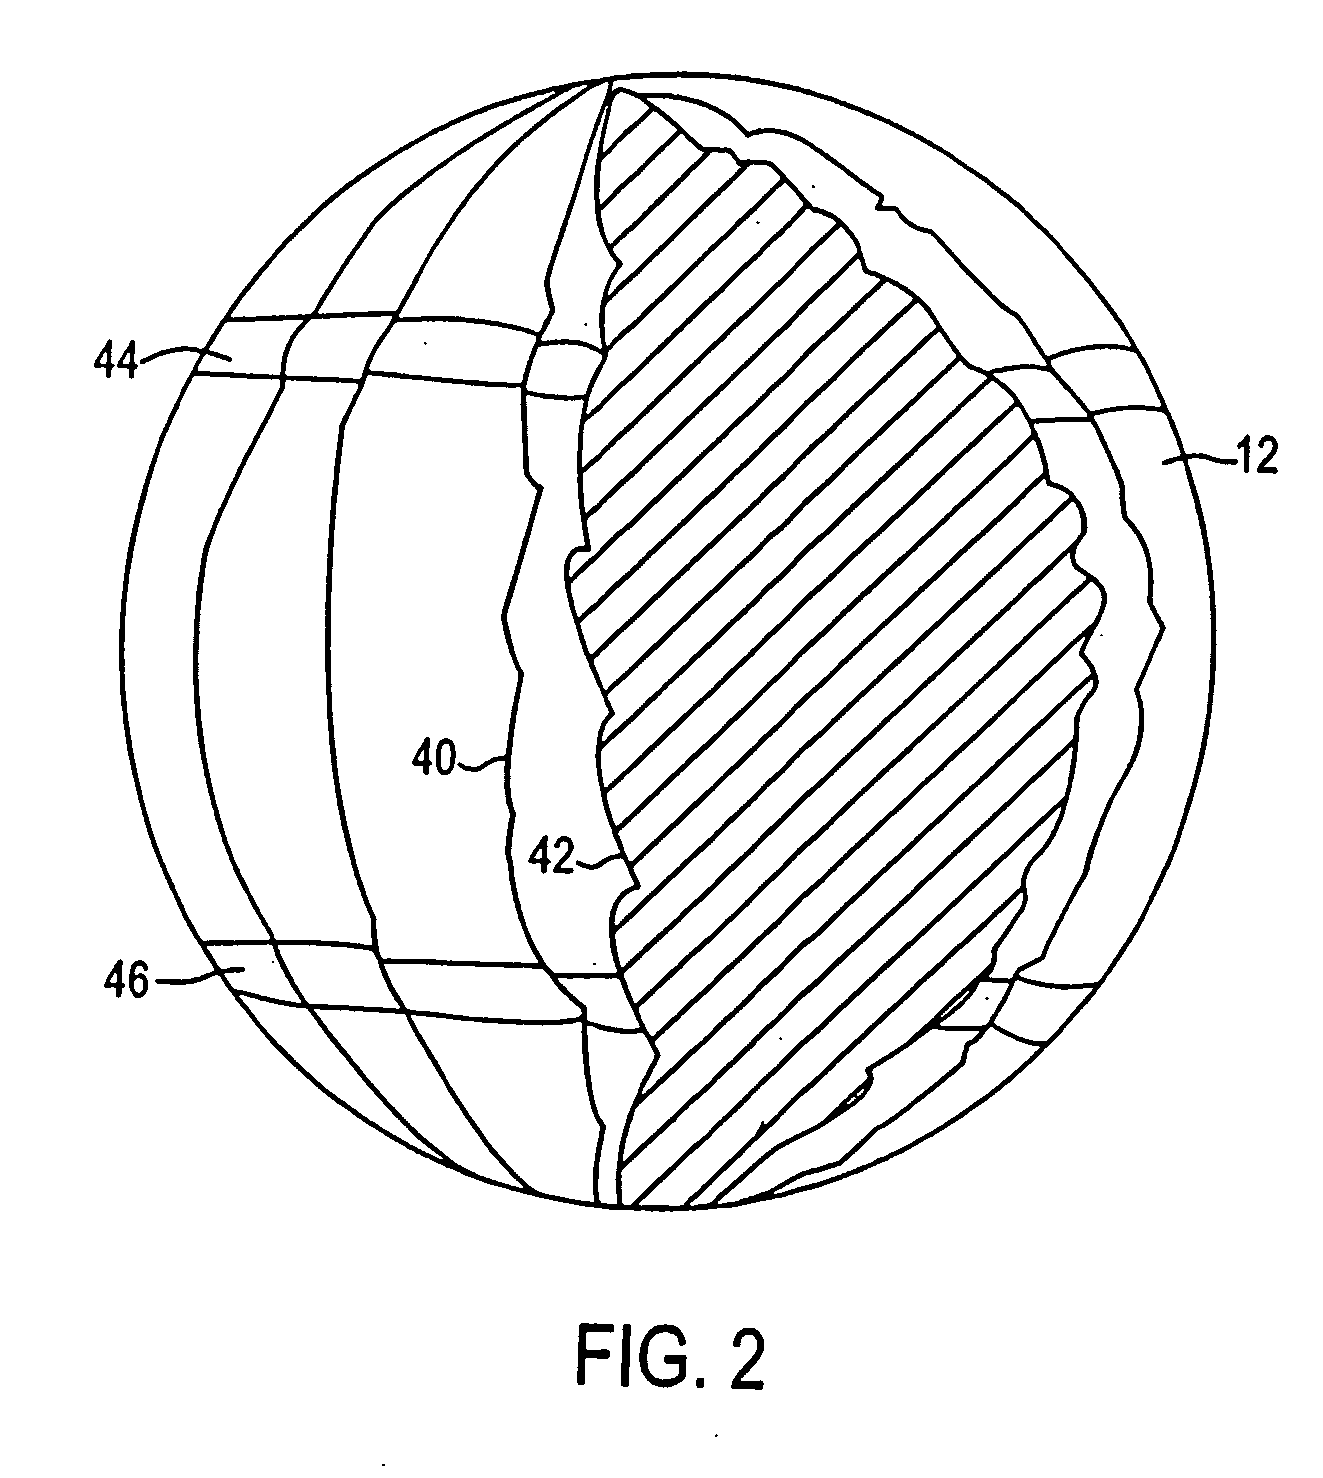 System and apparatus for propelling and carrying a user within a confined interior